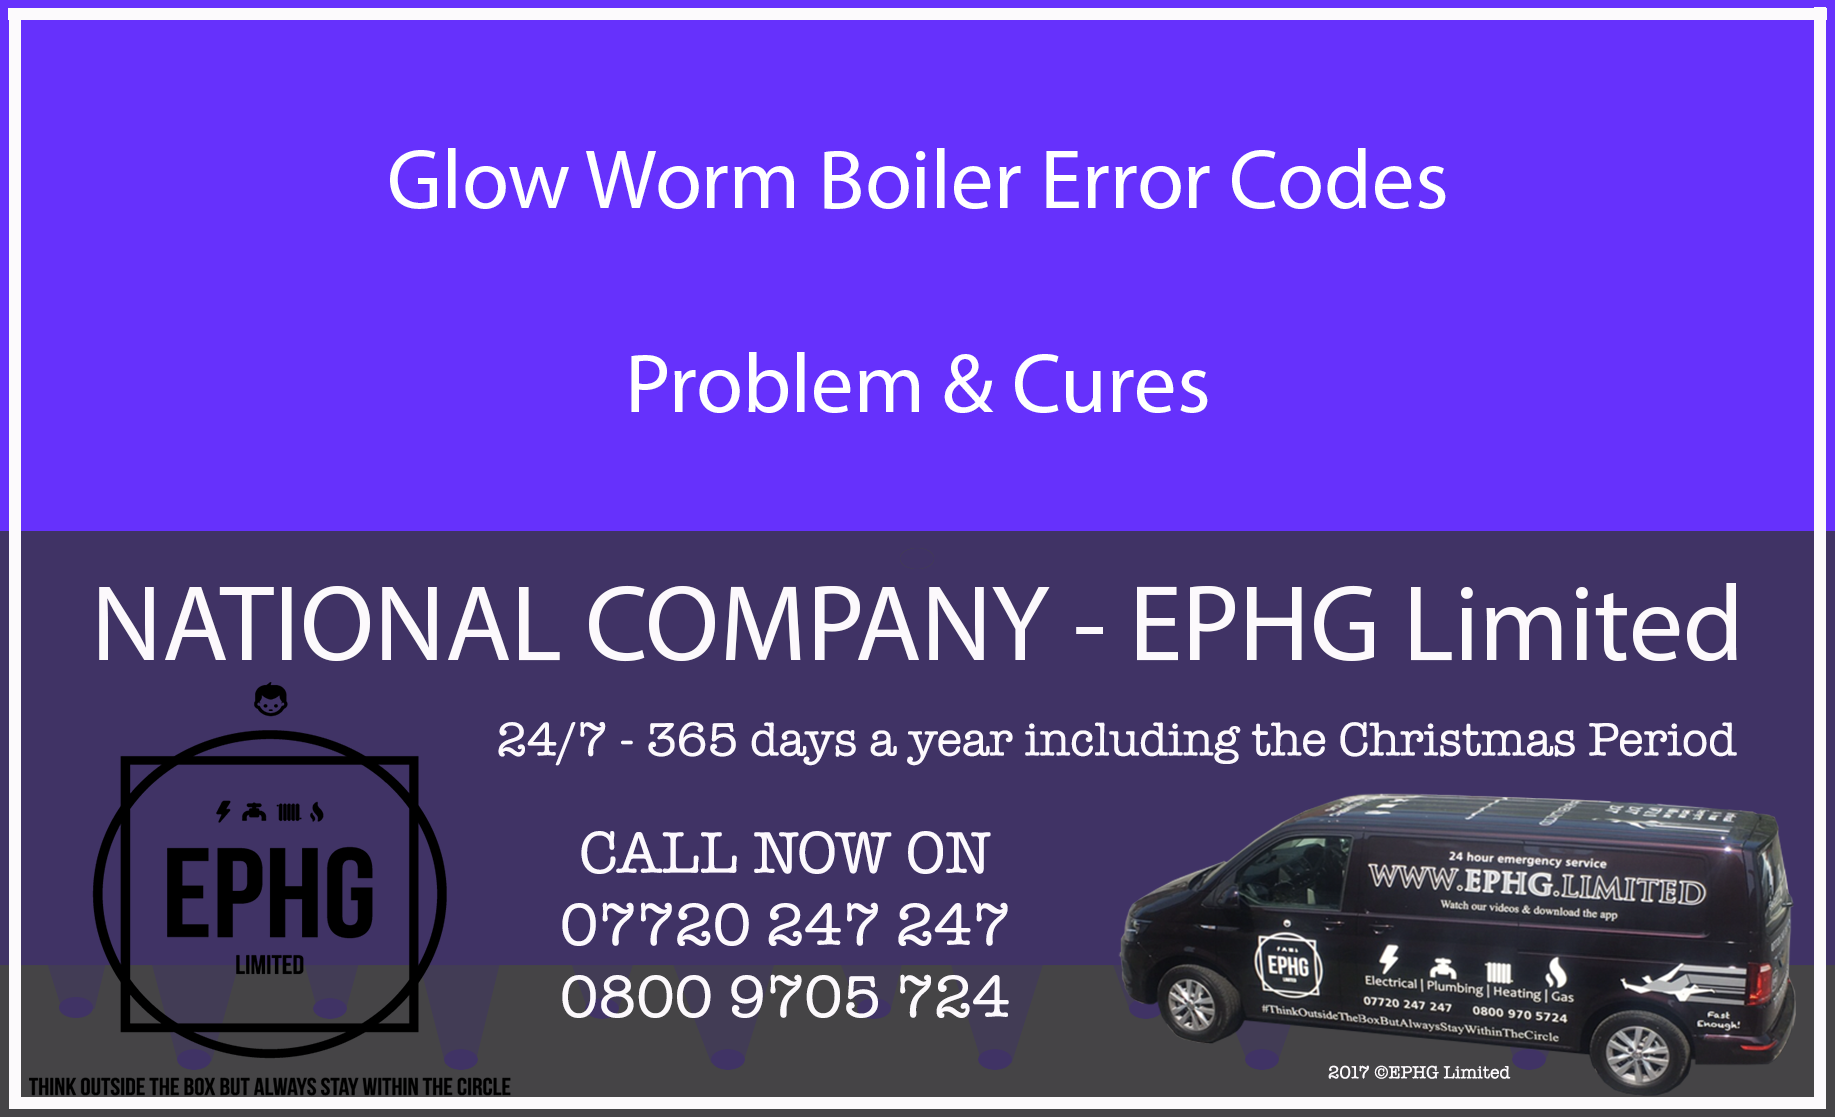 Glow Worm Boiler Problems And Cures